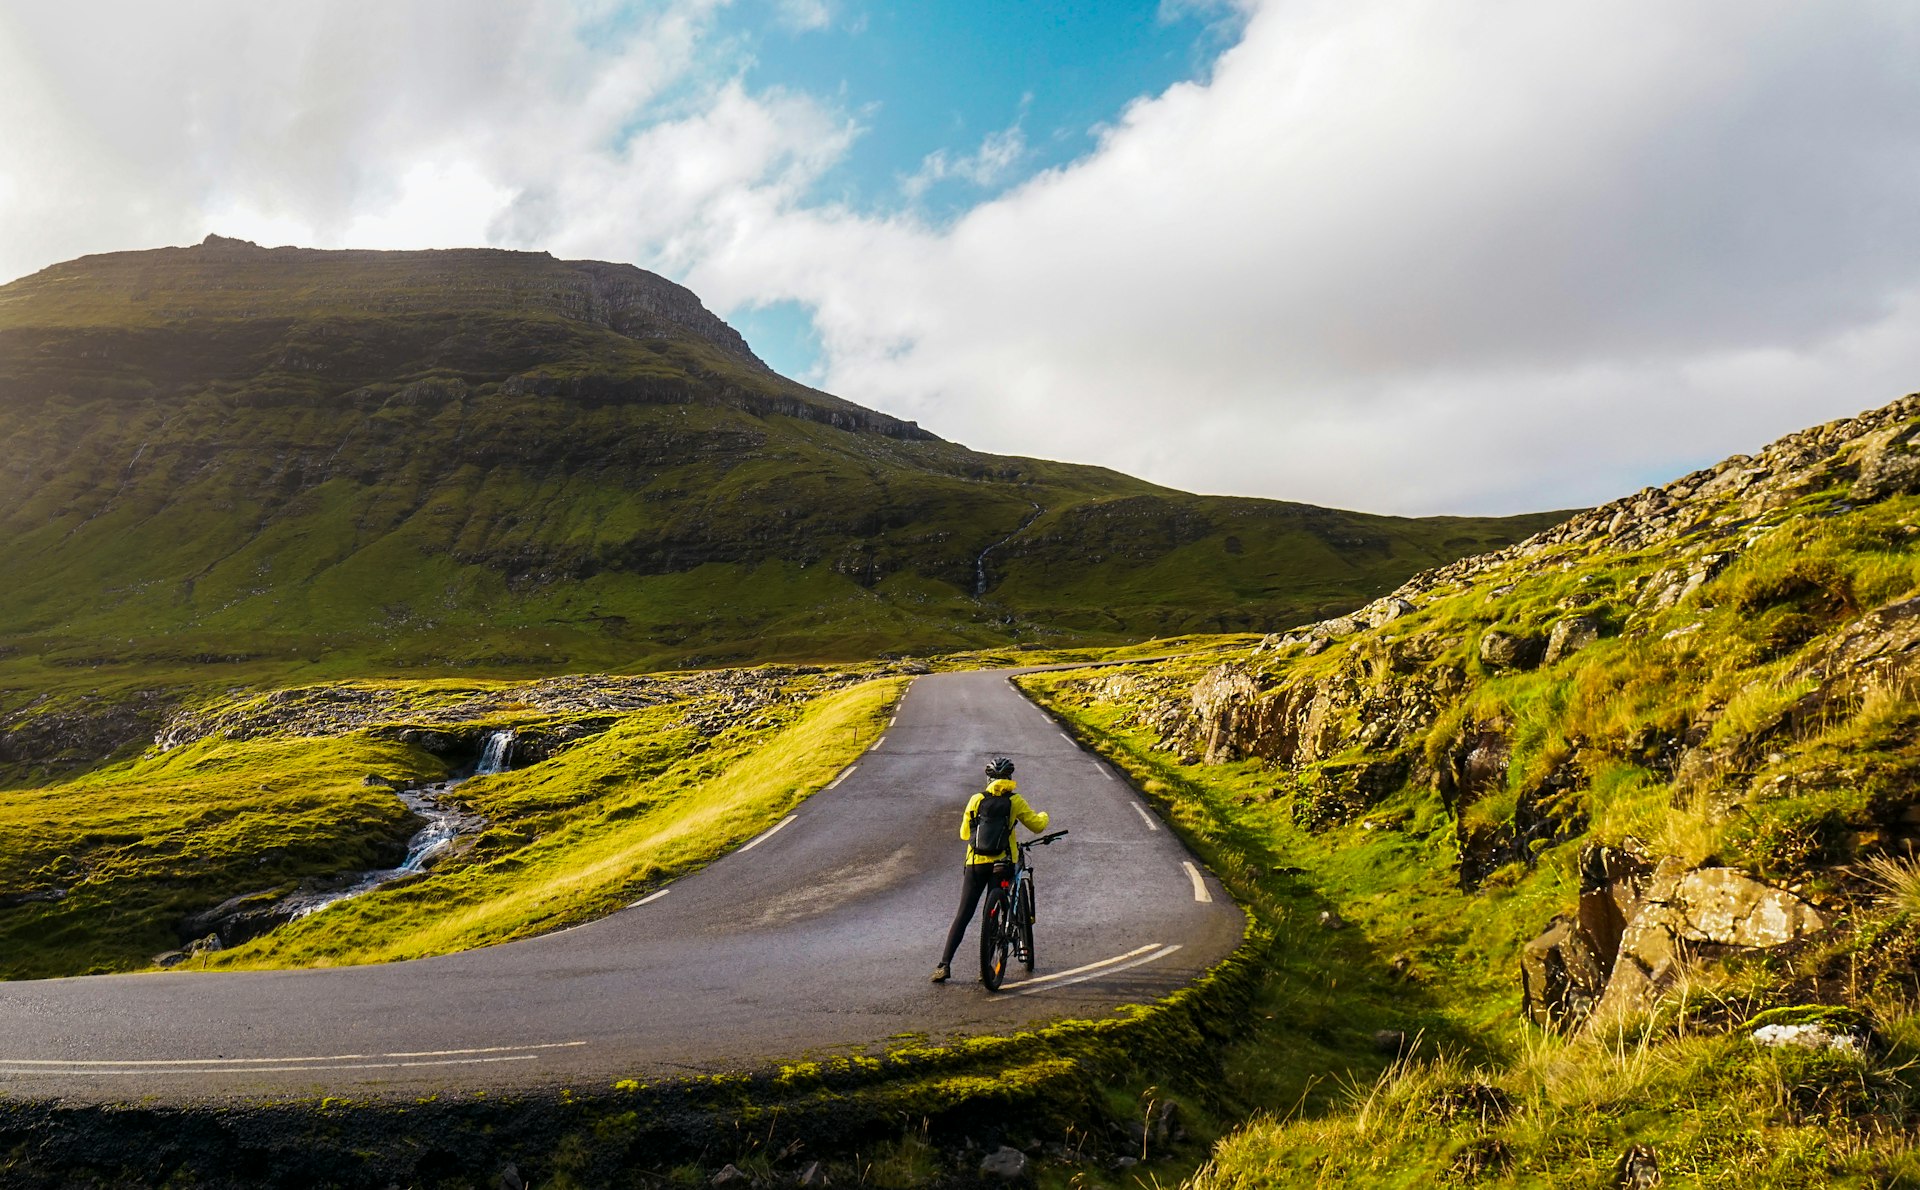 A cyclist stops on the road to admire a mountain view in the Faroe Islands